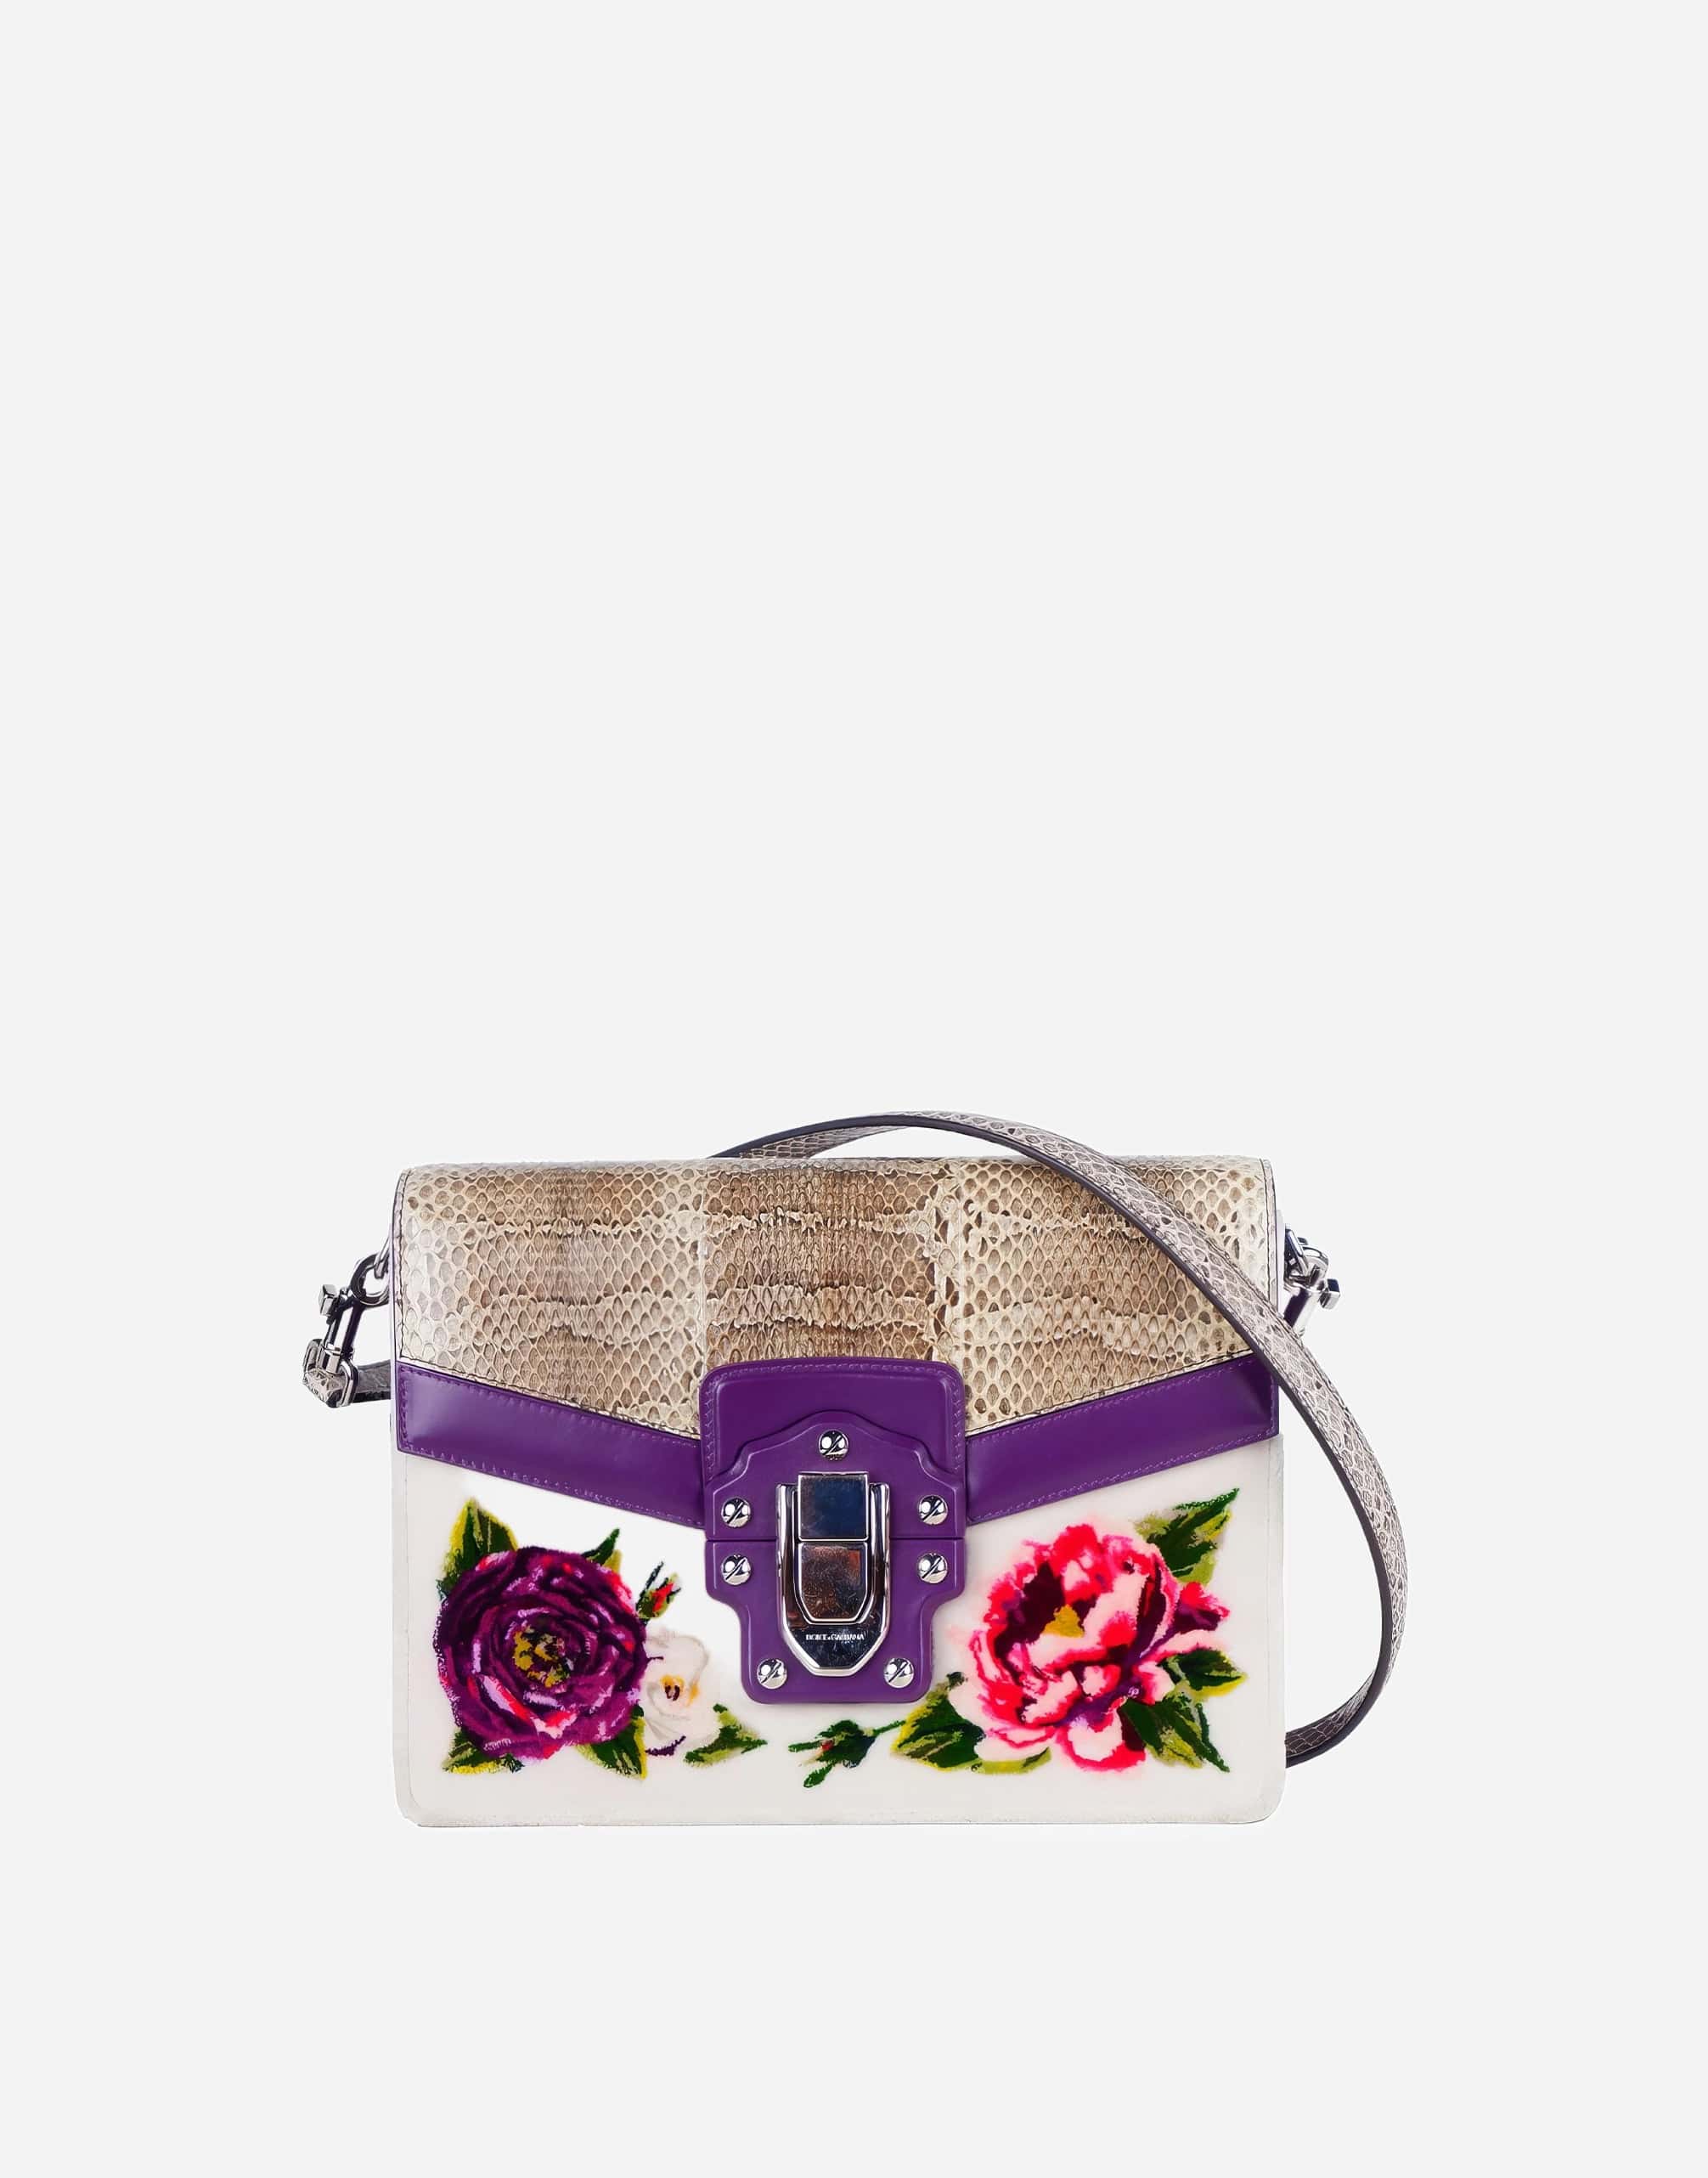 Dolce & Gabbana Lucia Crossbody Bag With Floral Print